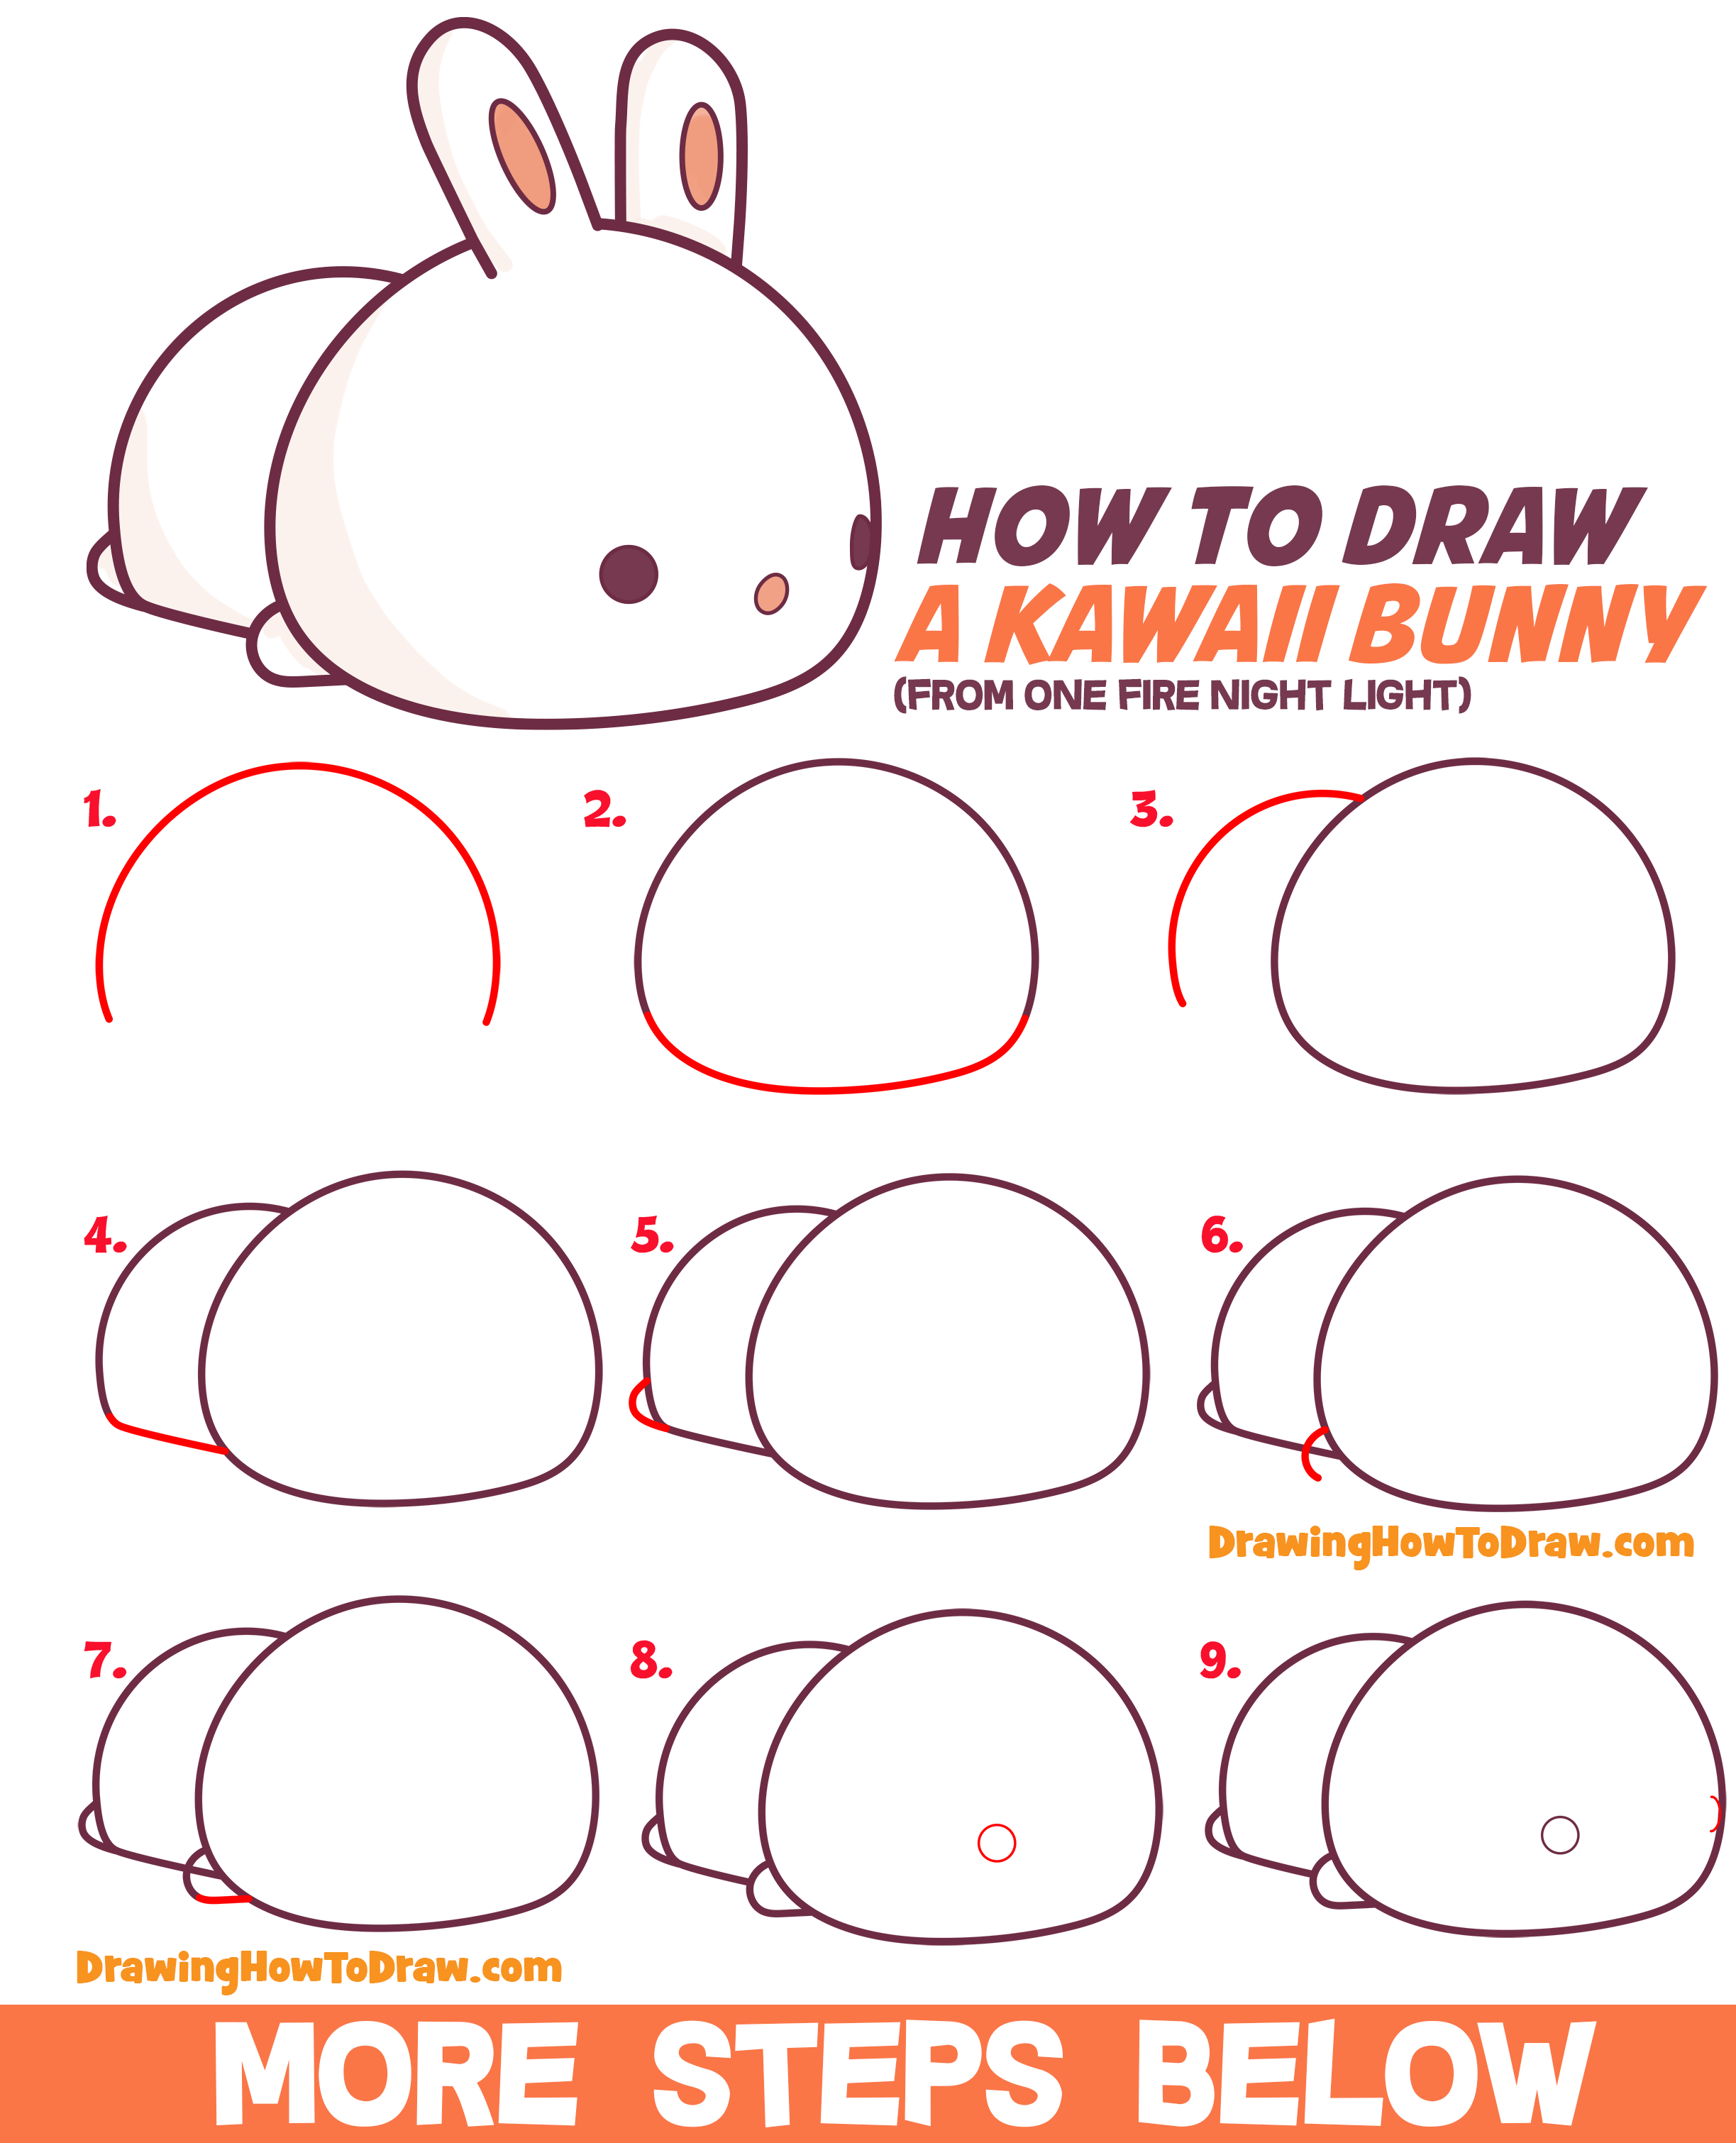 How to Draw a Bunny - An Easy Method for Drawing a Rabbit